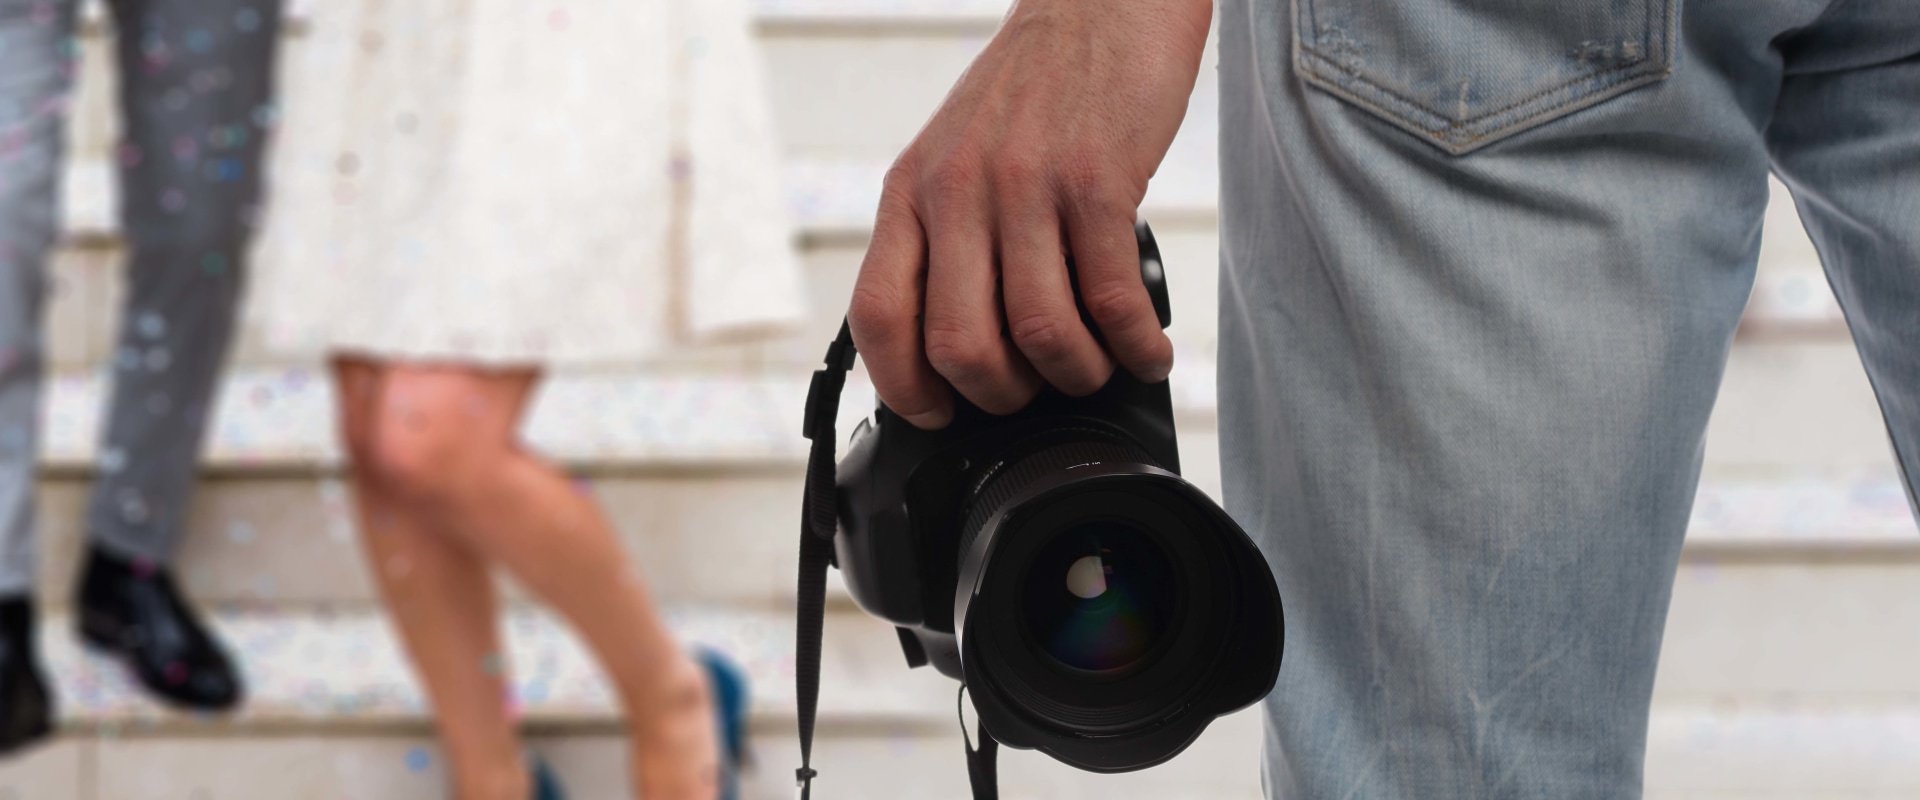 Understanding Photographer Contracts and Payment Terms